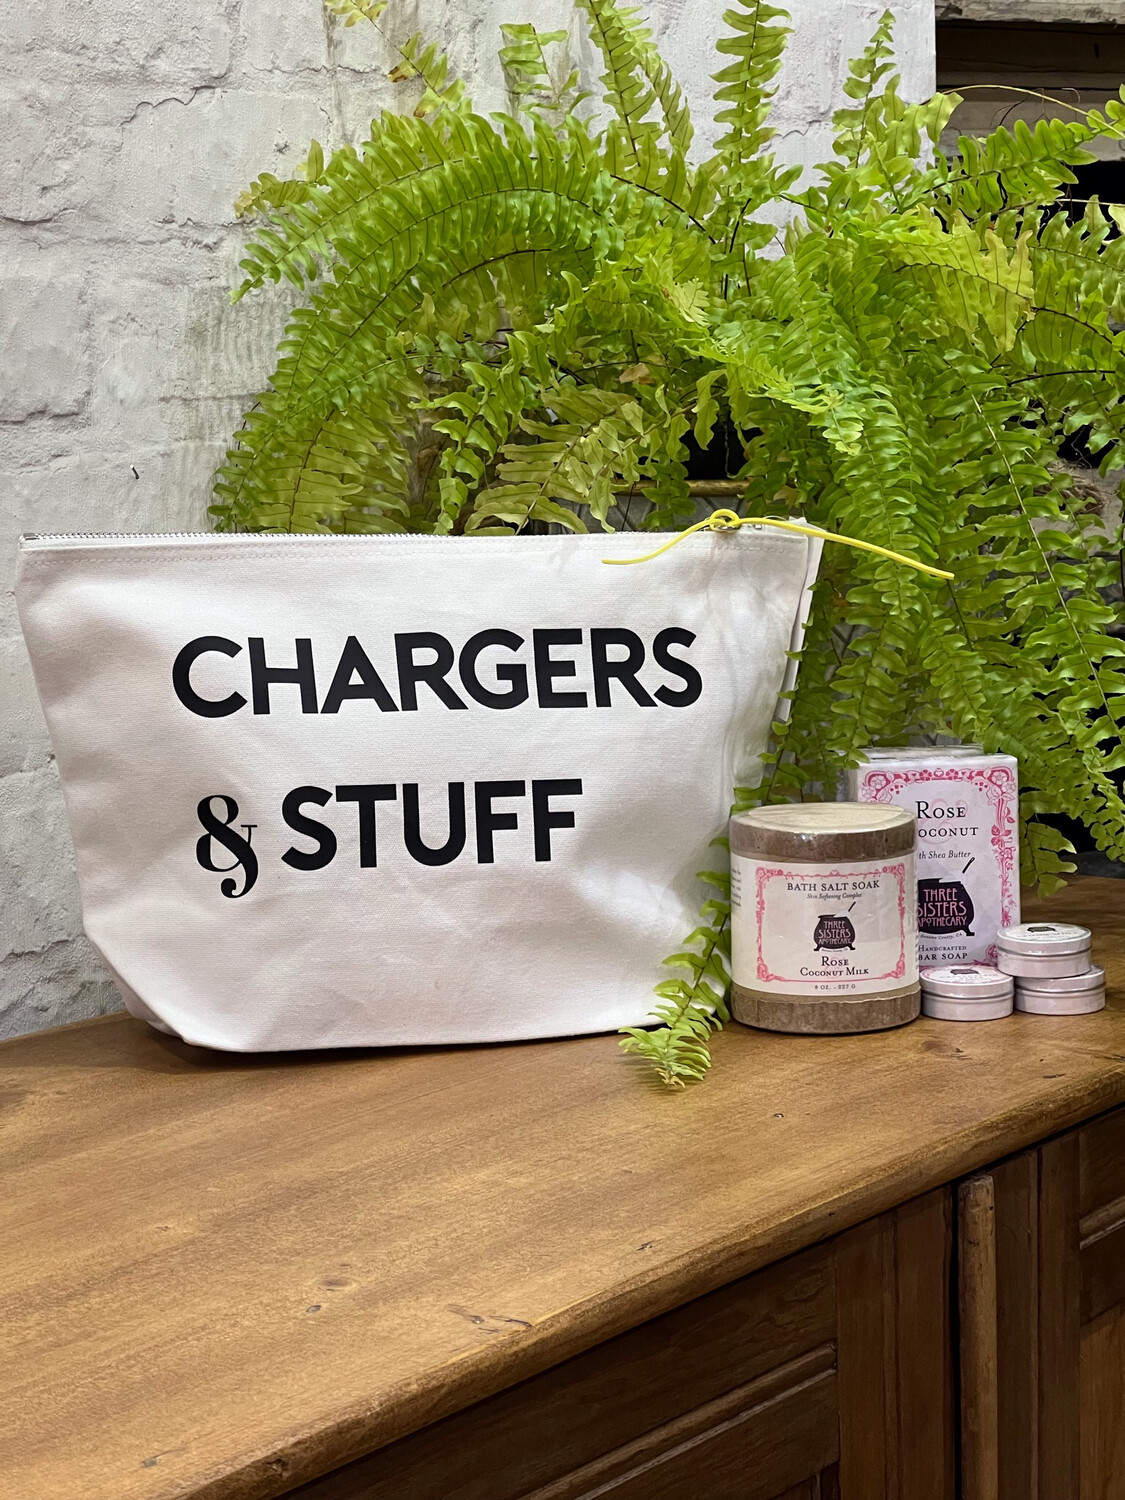 ‘CHARGERS & STUFF Pouch